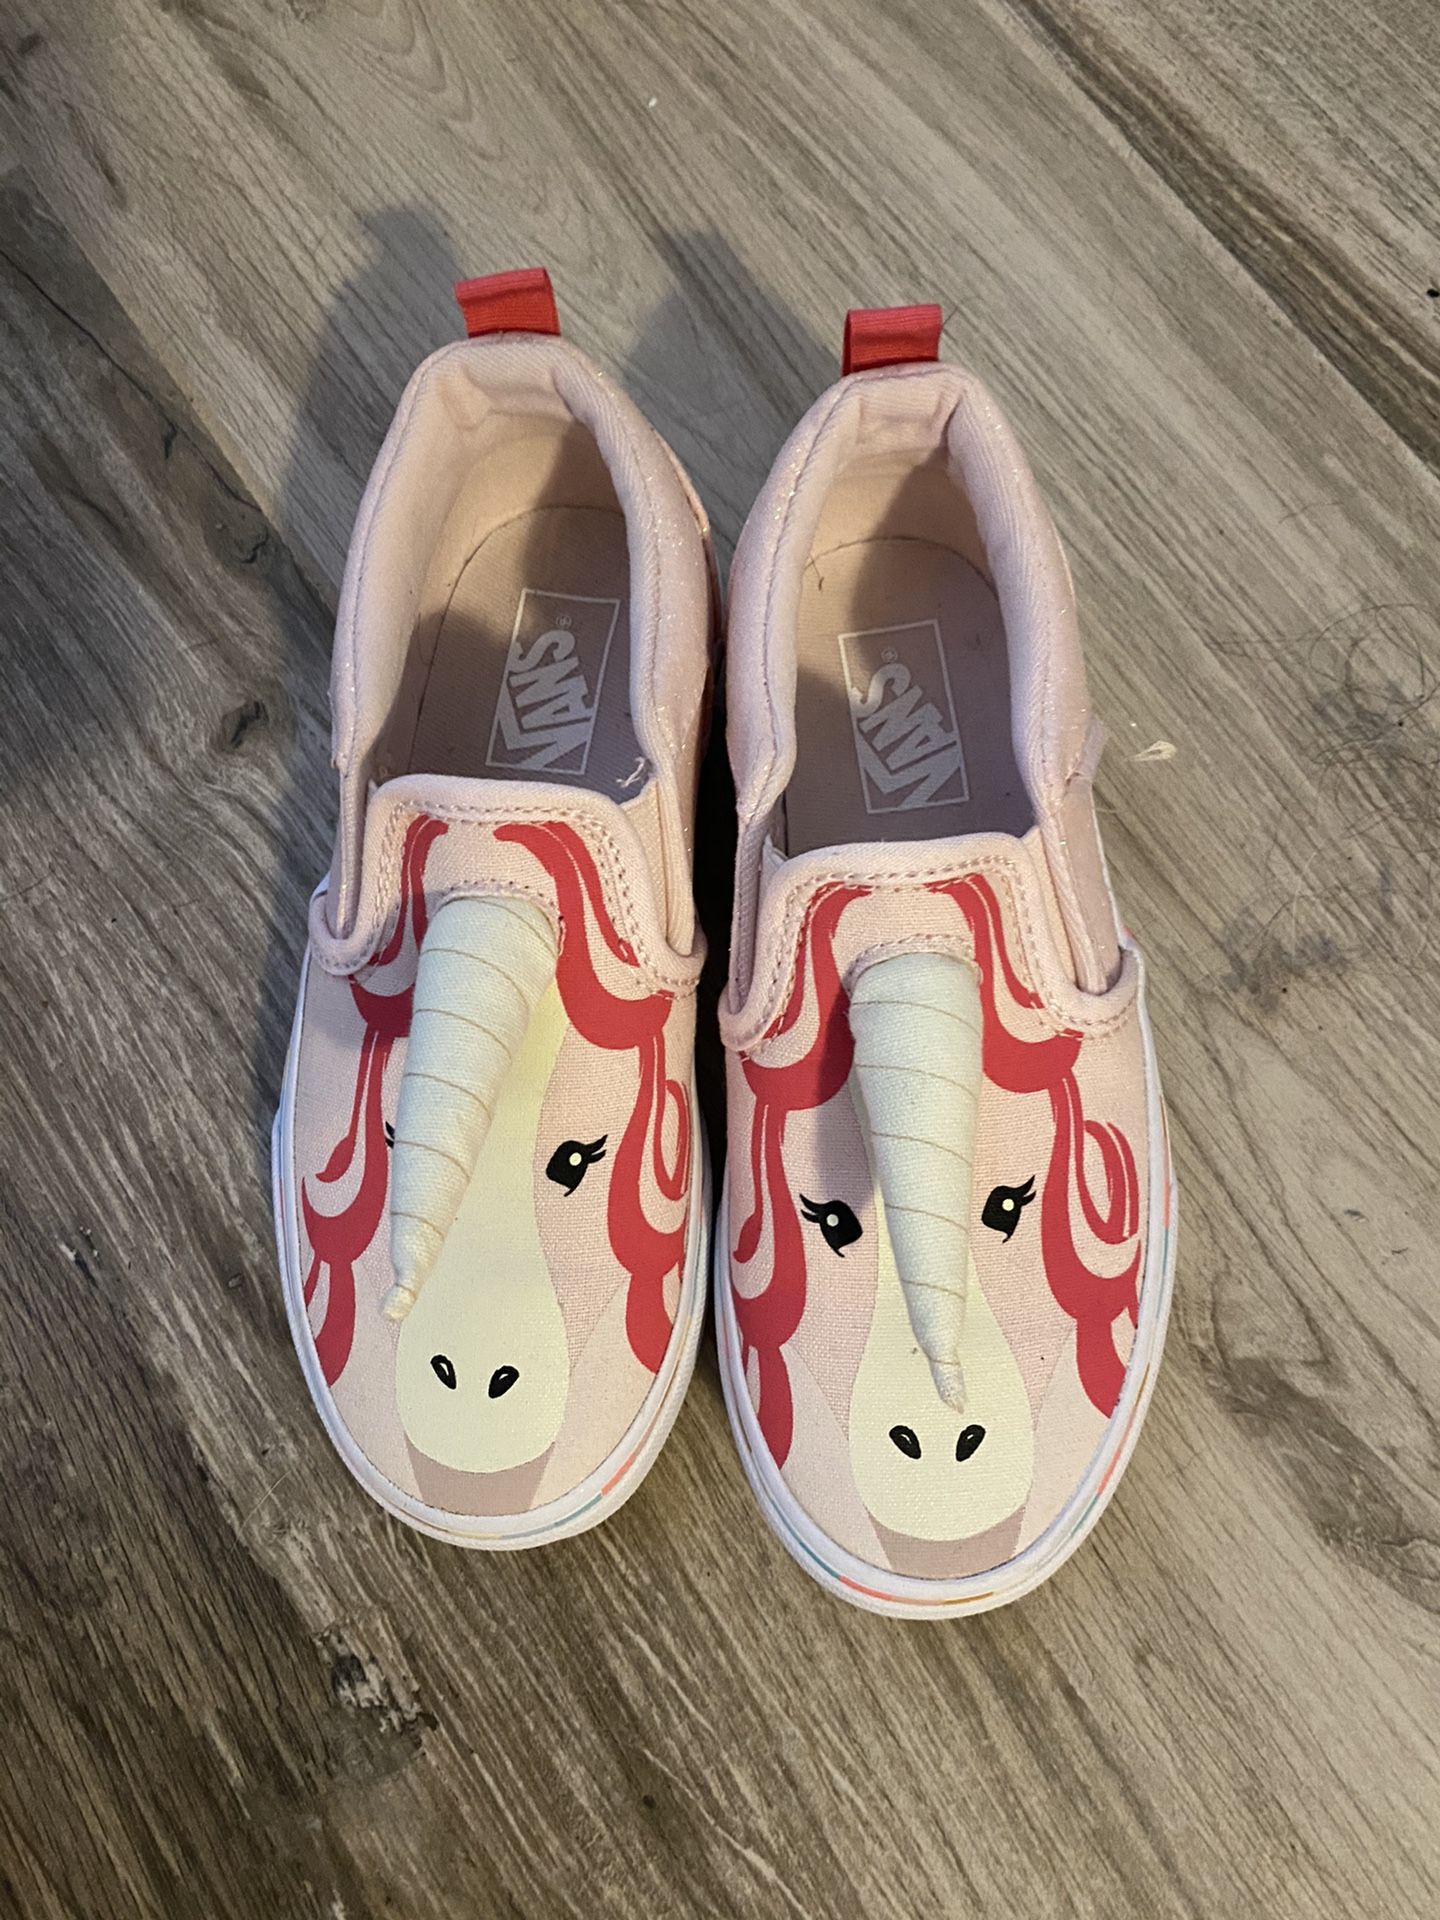 Can unicorn Slip Ons Sneakers